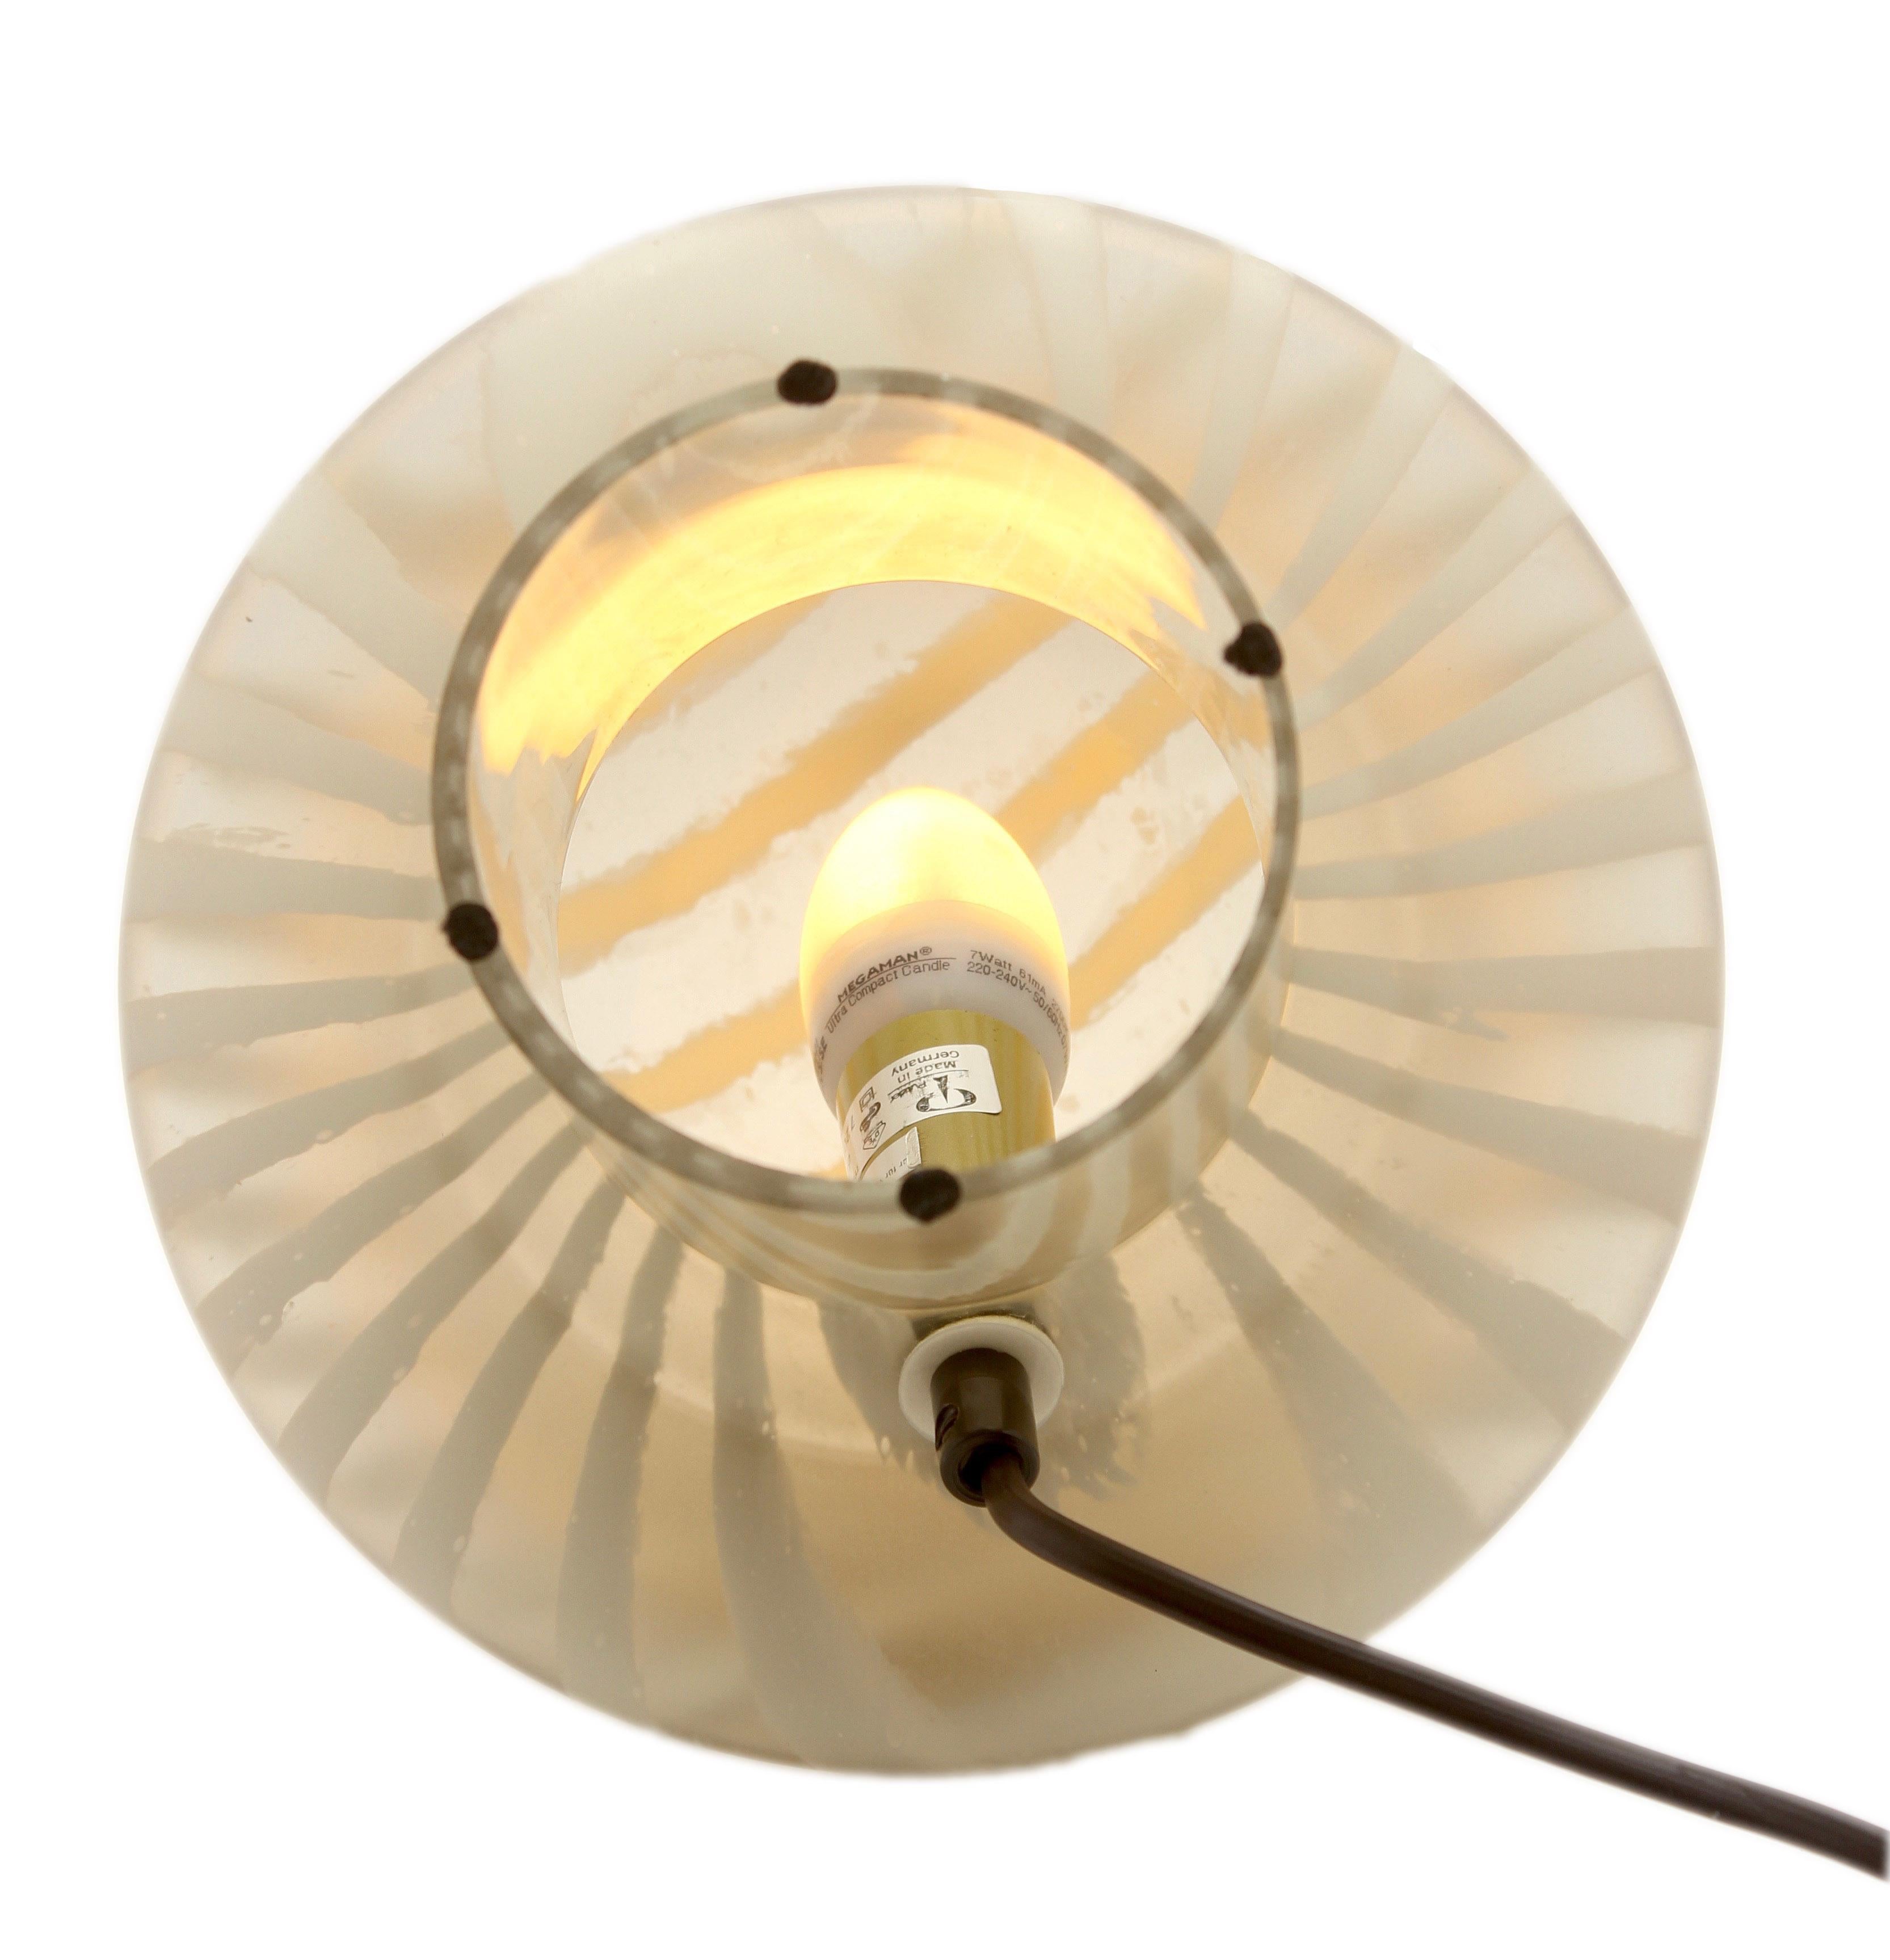 Art Glass Mid-Century Modernist German 1960s Table Lamp Was Designed by Peill & Putzler